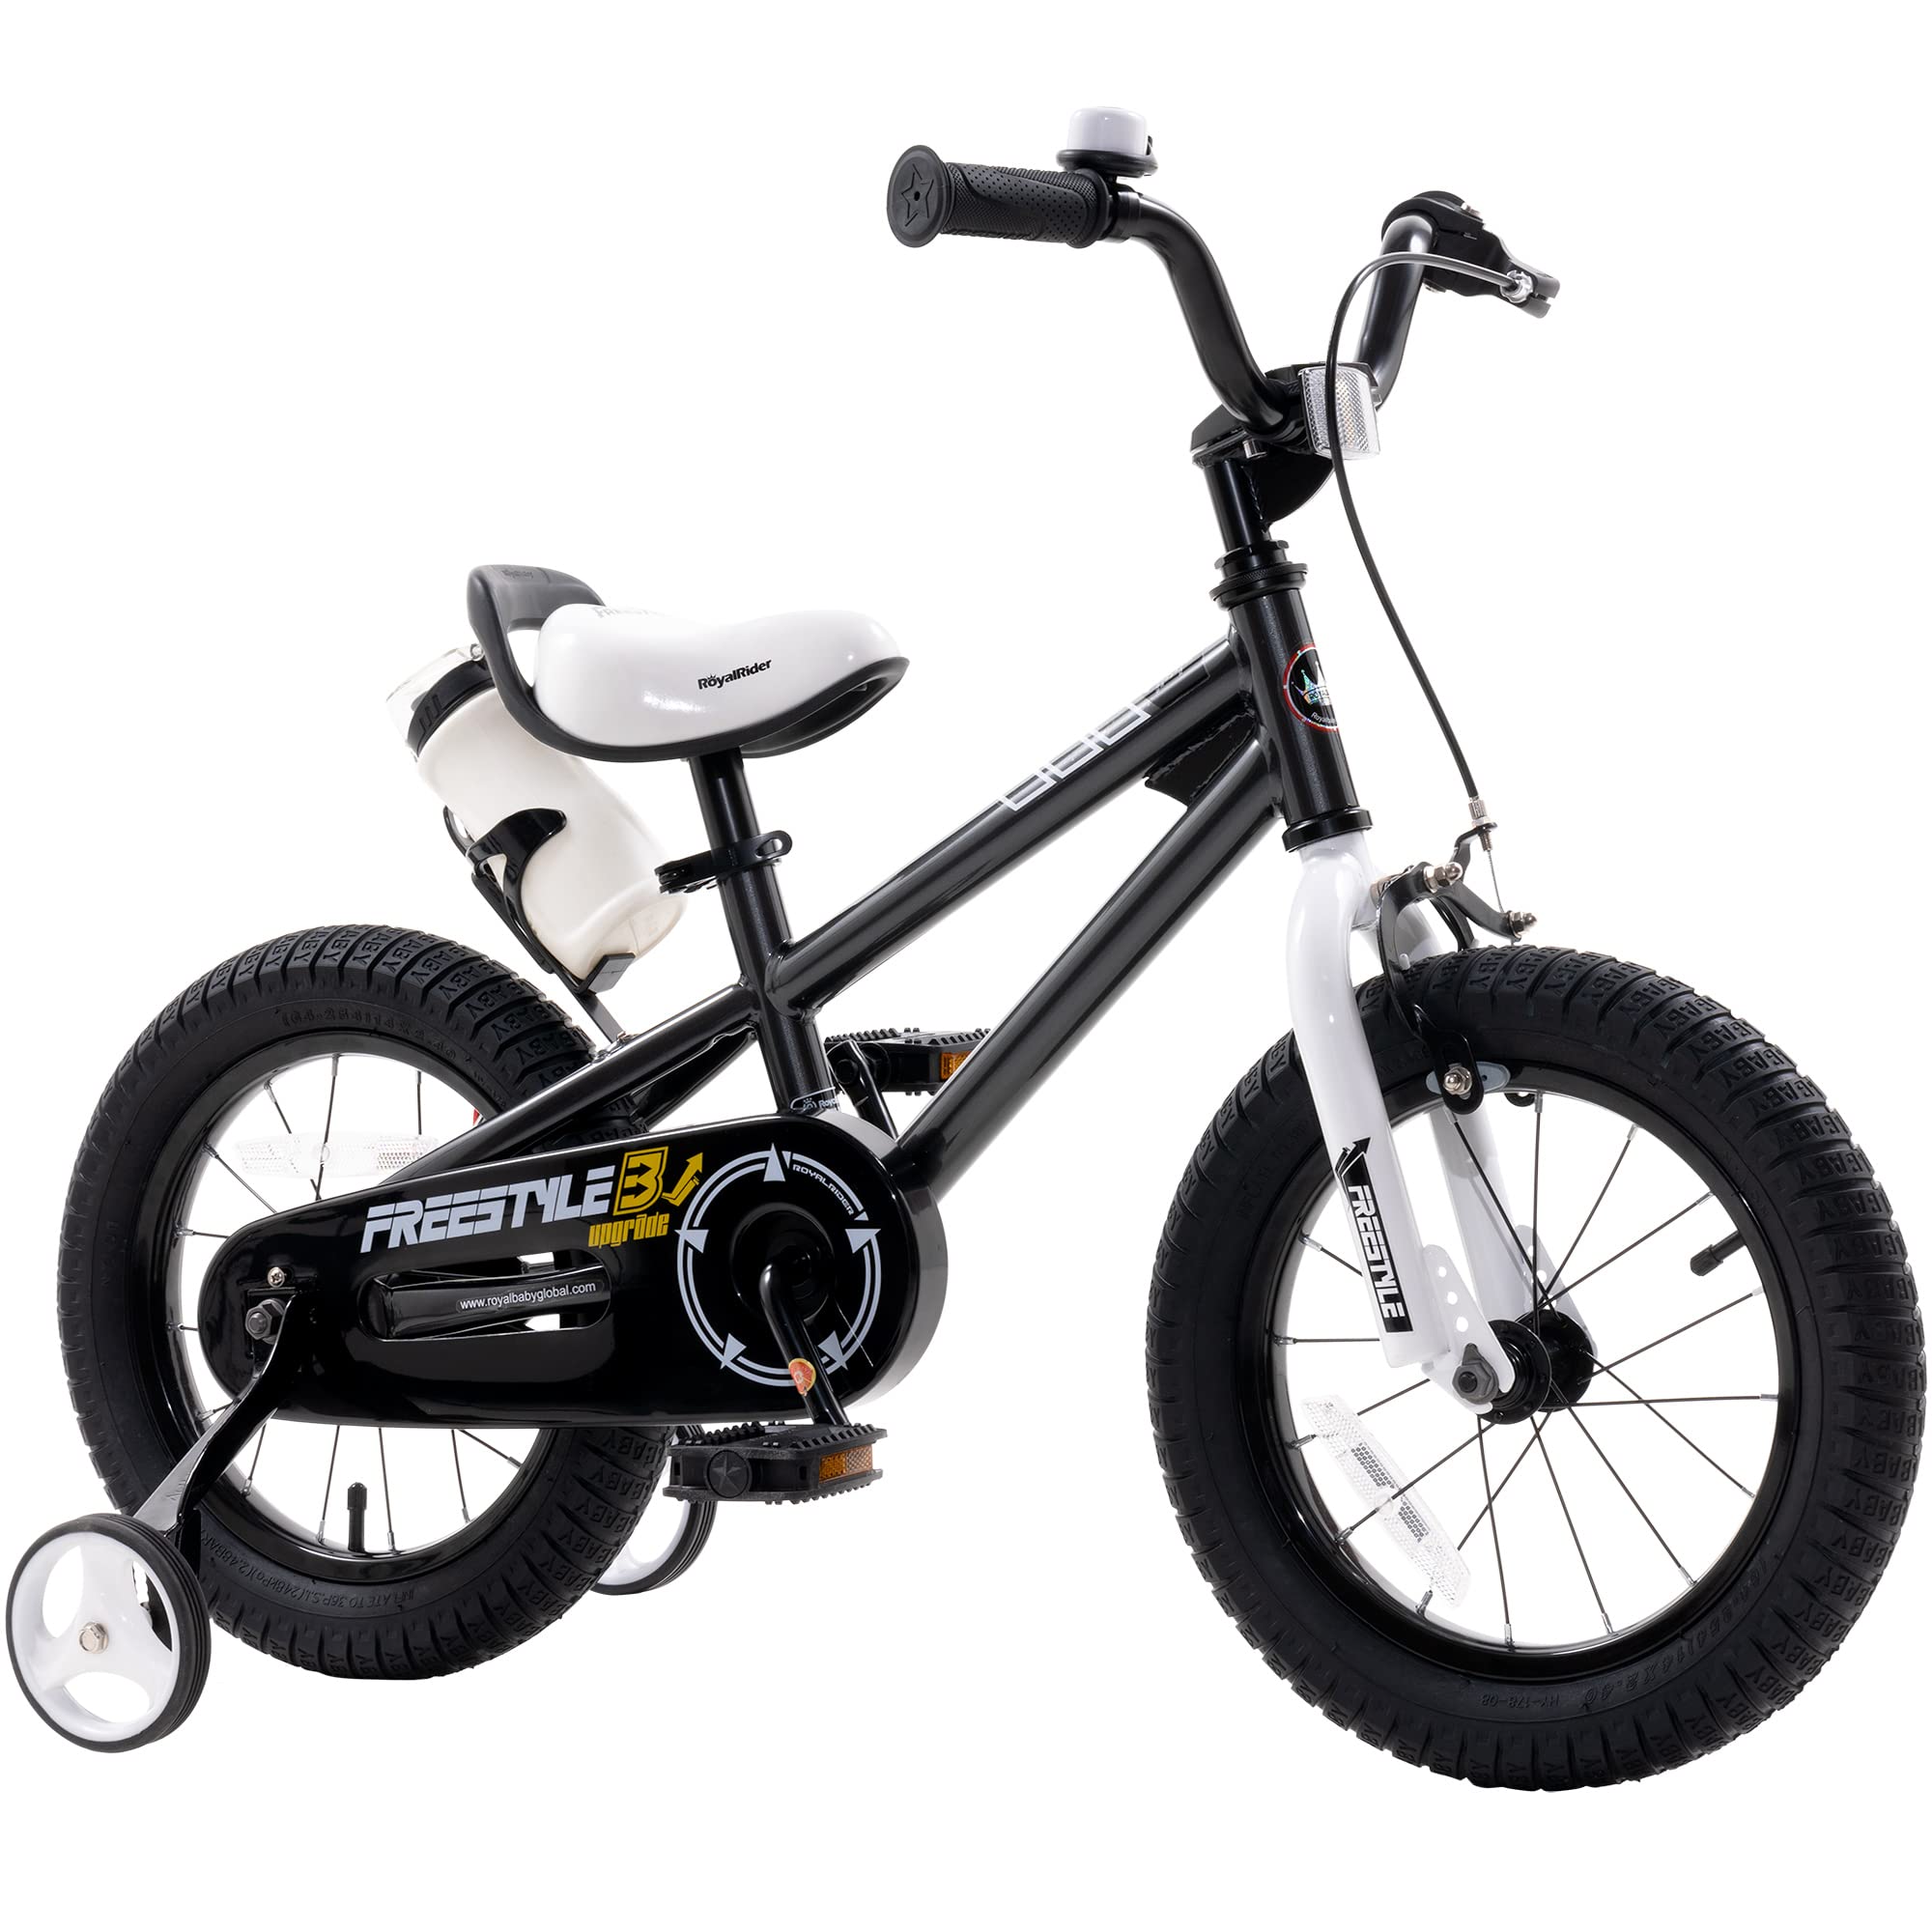 Royalbaby Freestyle Kids Bike Boys Girls 16 Inch BMX Childrens Bicycle with Training Wheels & Kickstand for Ages 4-7 years, Black